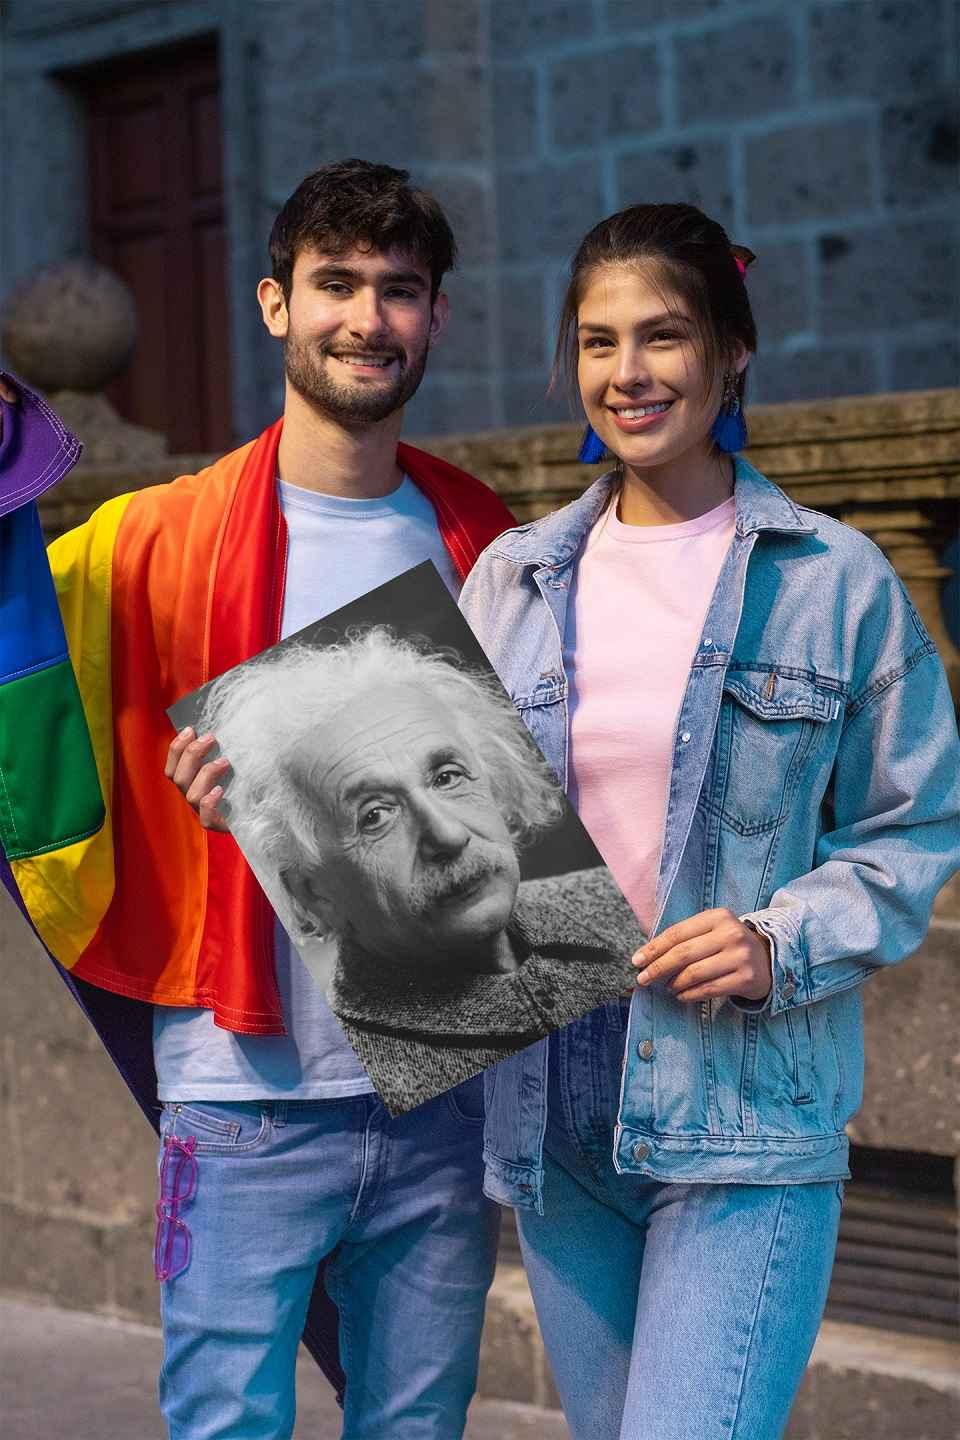 Smiling young man and woman holding an Einstein poster.